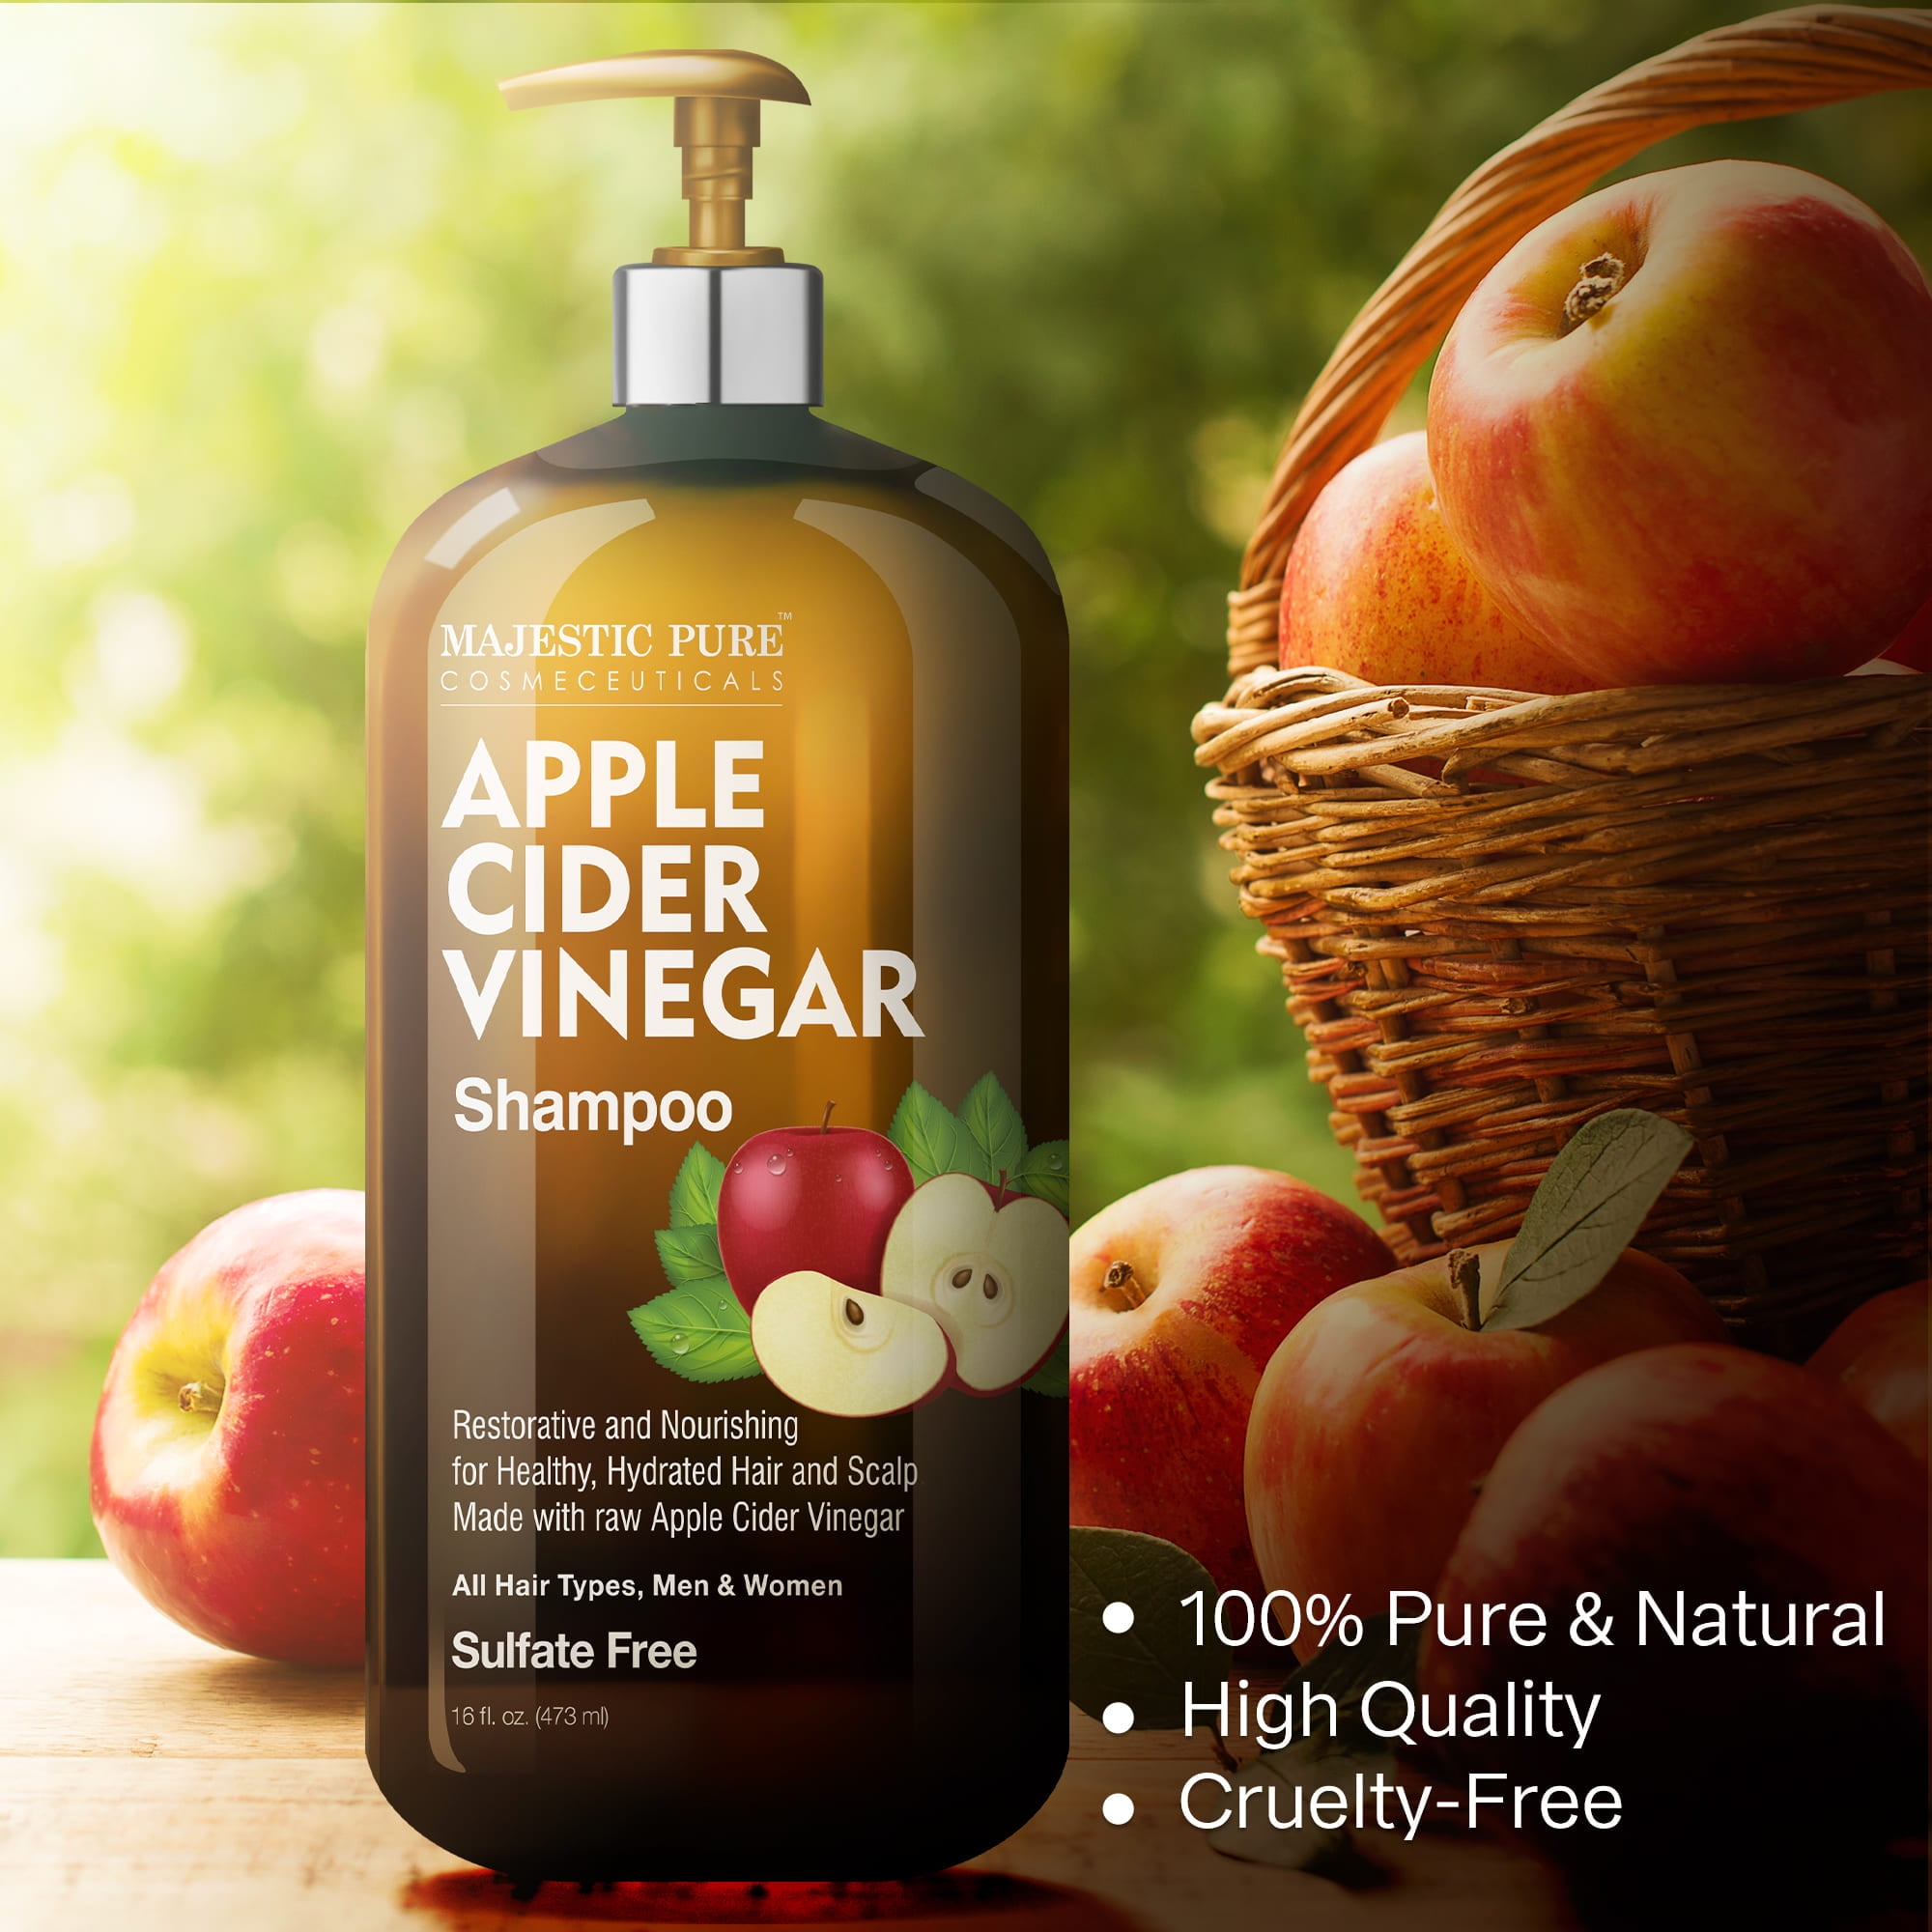 Majestic Pure Apple Vinegar Shampoo - Restores Shine & Reduces Itchy Scalp, Dandruff & Frizz - Sulfate Free, for All Hair Types, Men and Women - 16 oz - Walmart.com